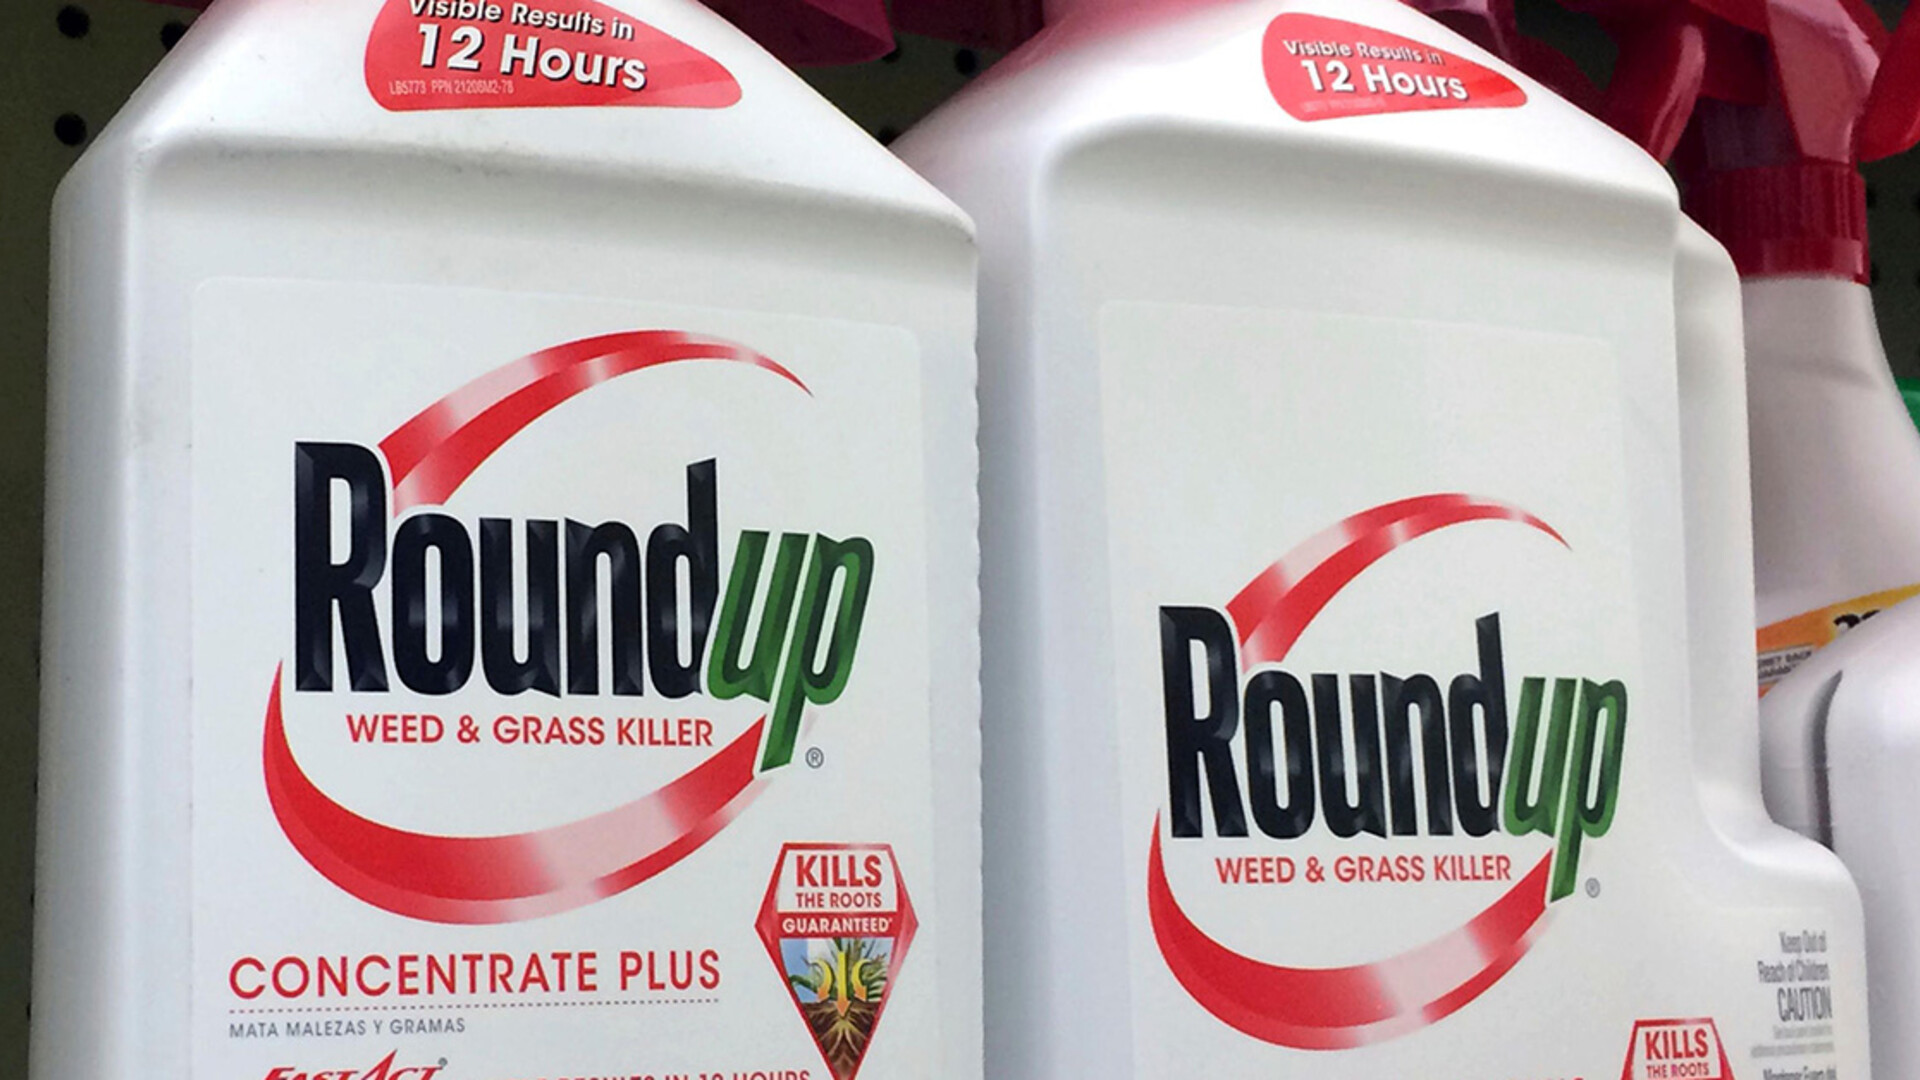 Bayer Petitions US Supreme Court on Roundup Case